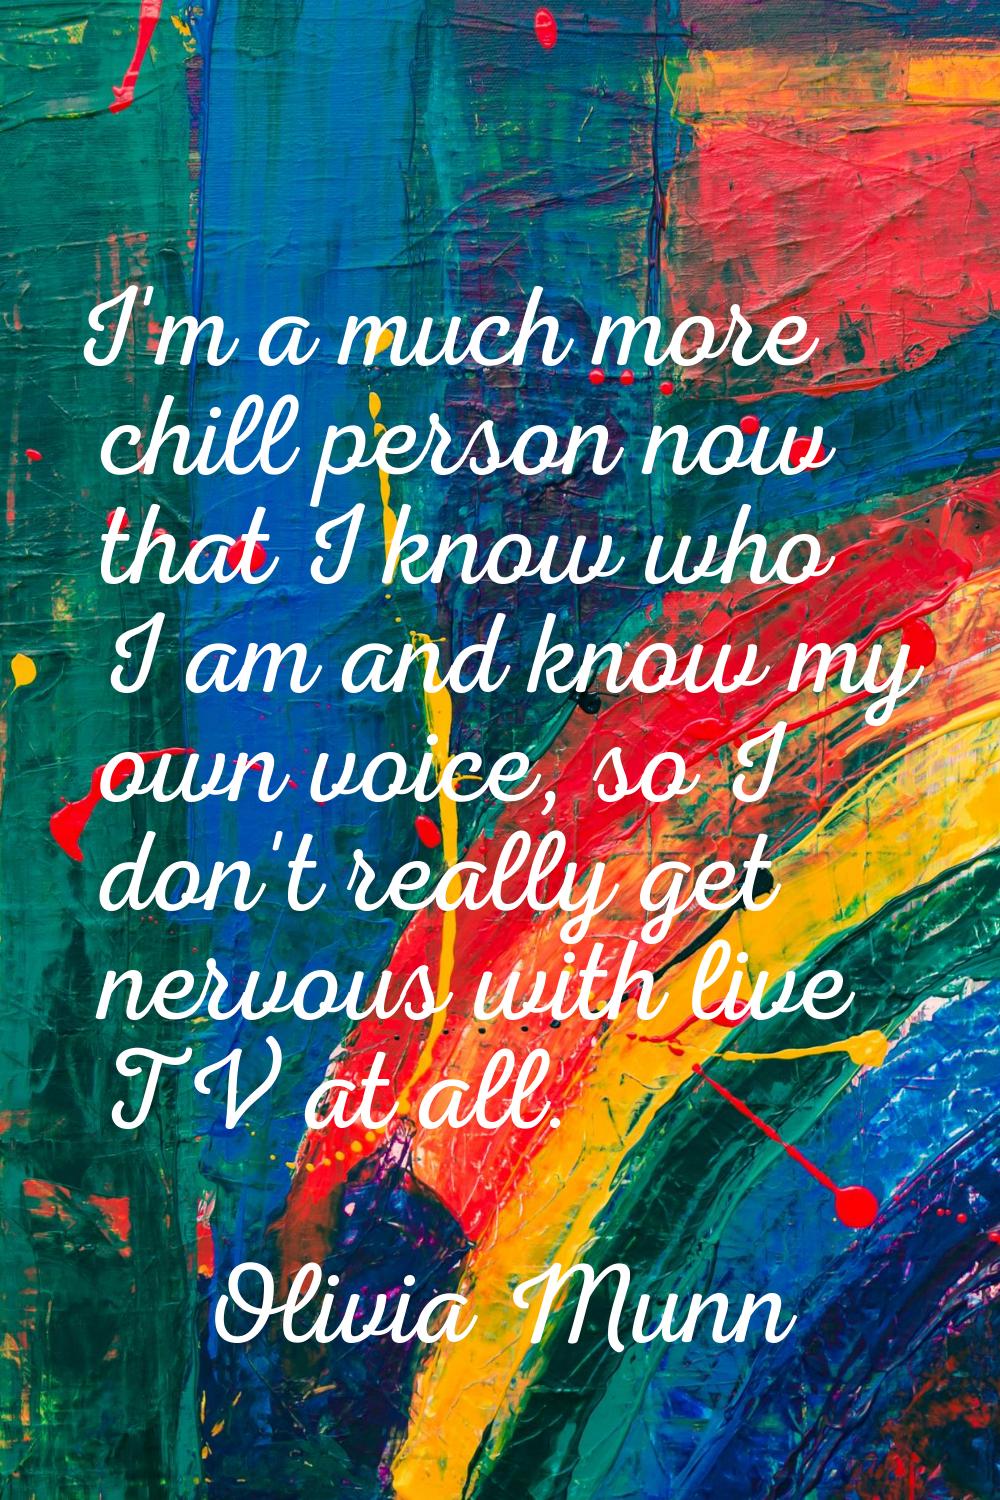 I'm a much more chill person now that I know who I am and know my own voice, so I don't really get 